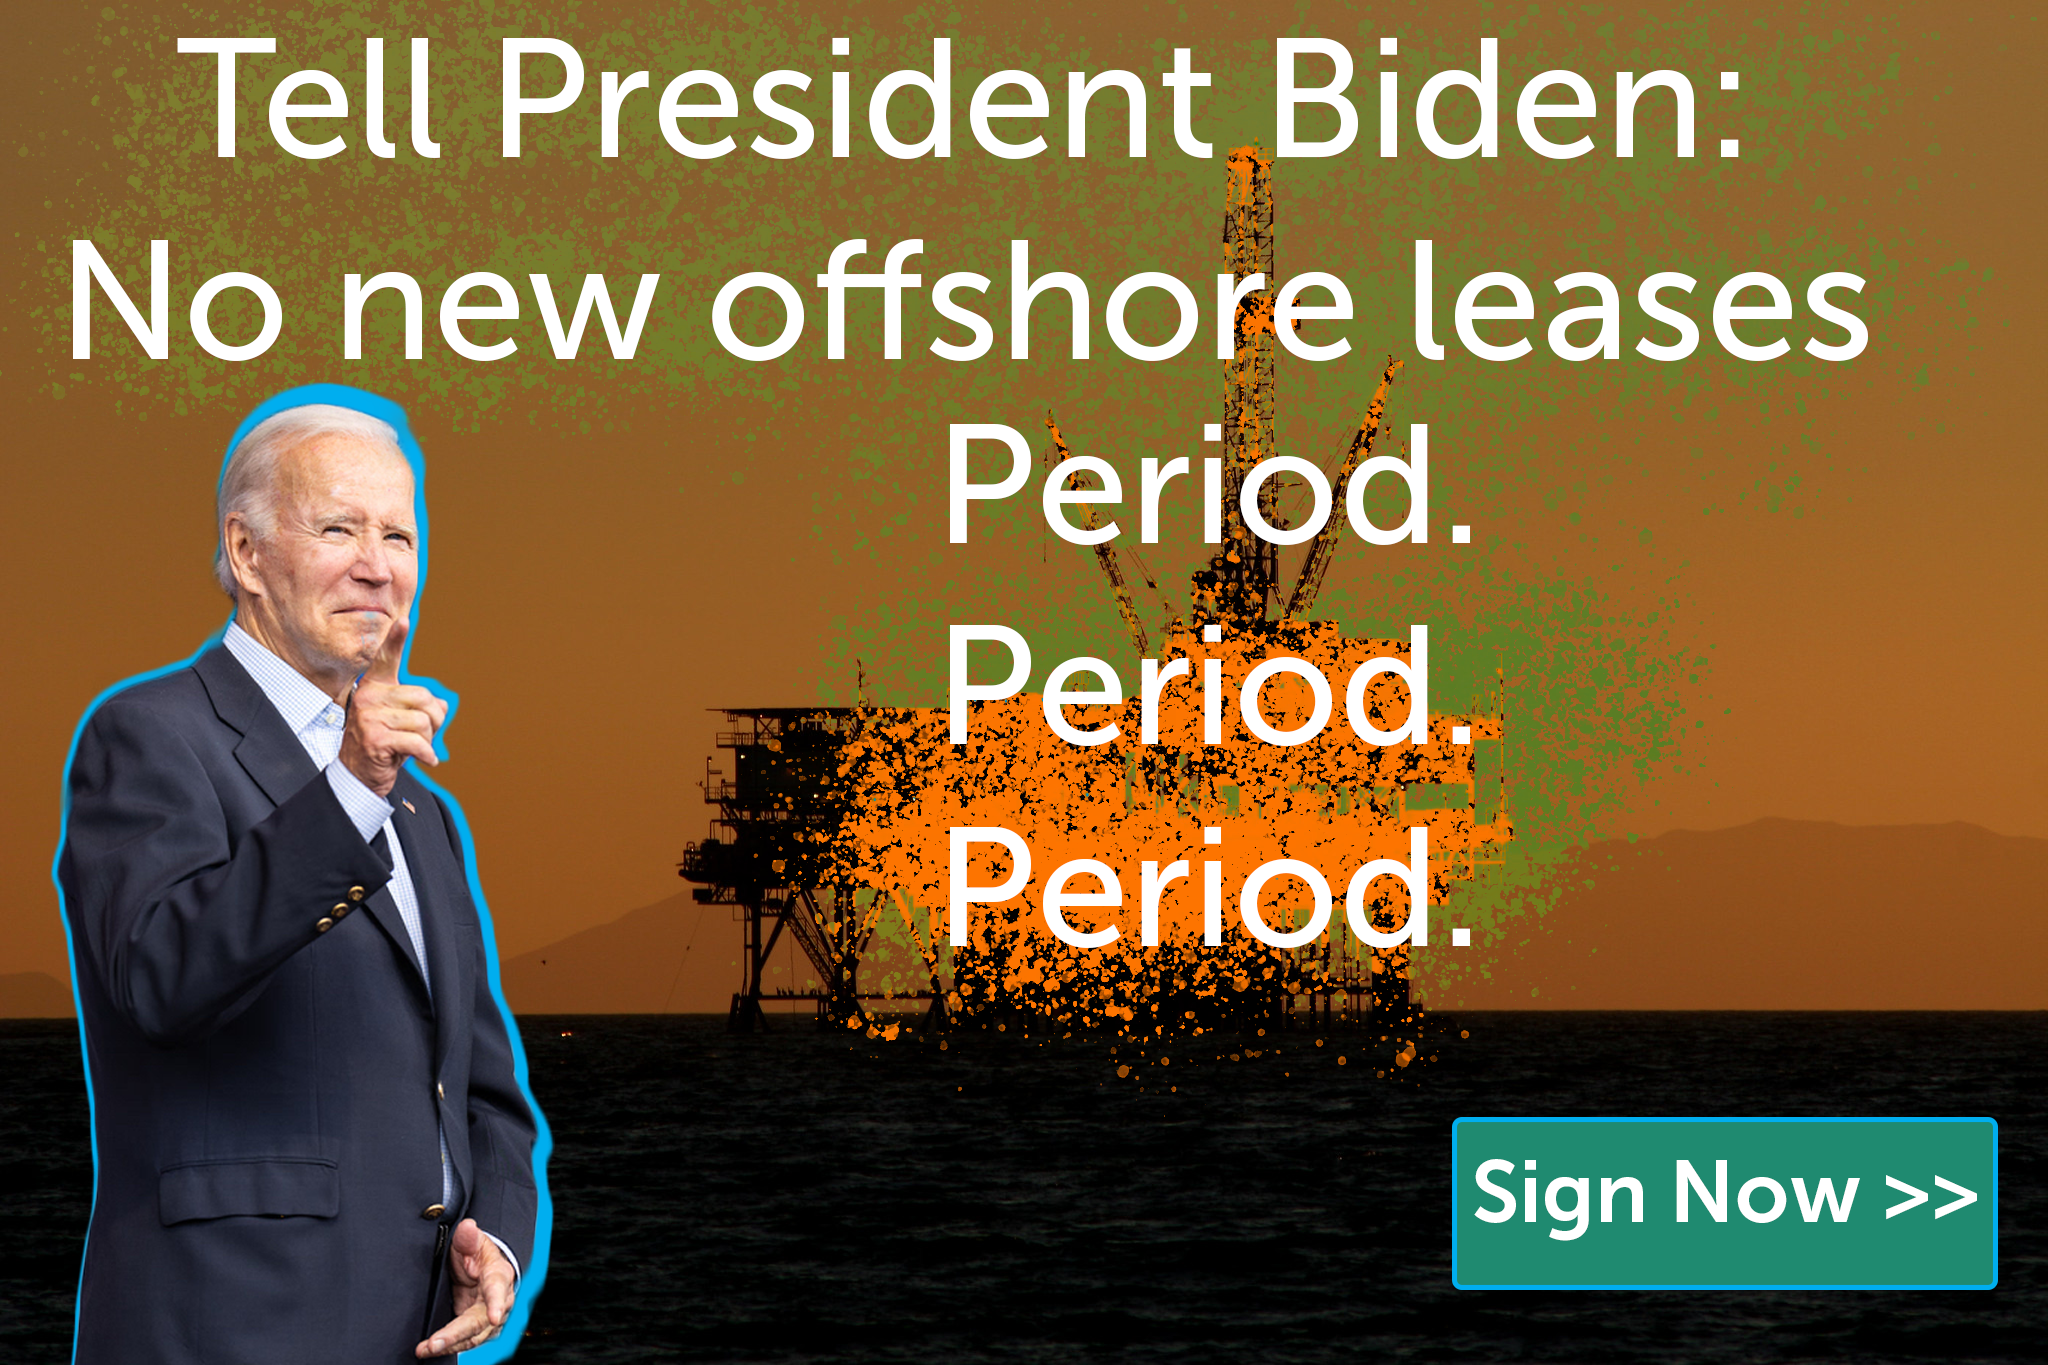 Tell President Biden: No new offshore leases Period. Period. Period.